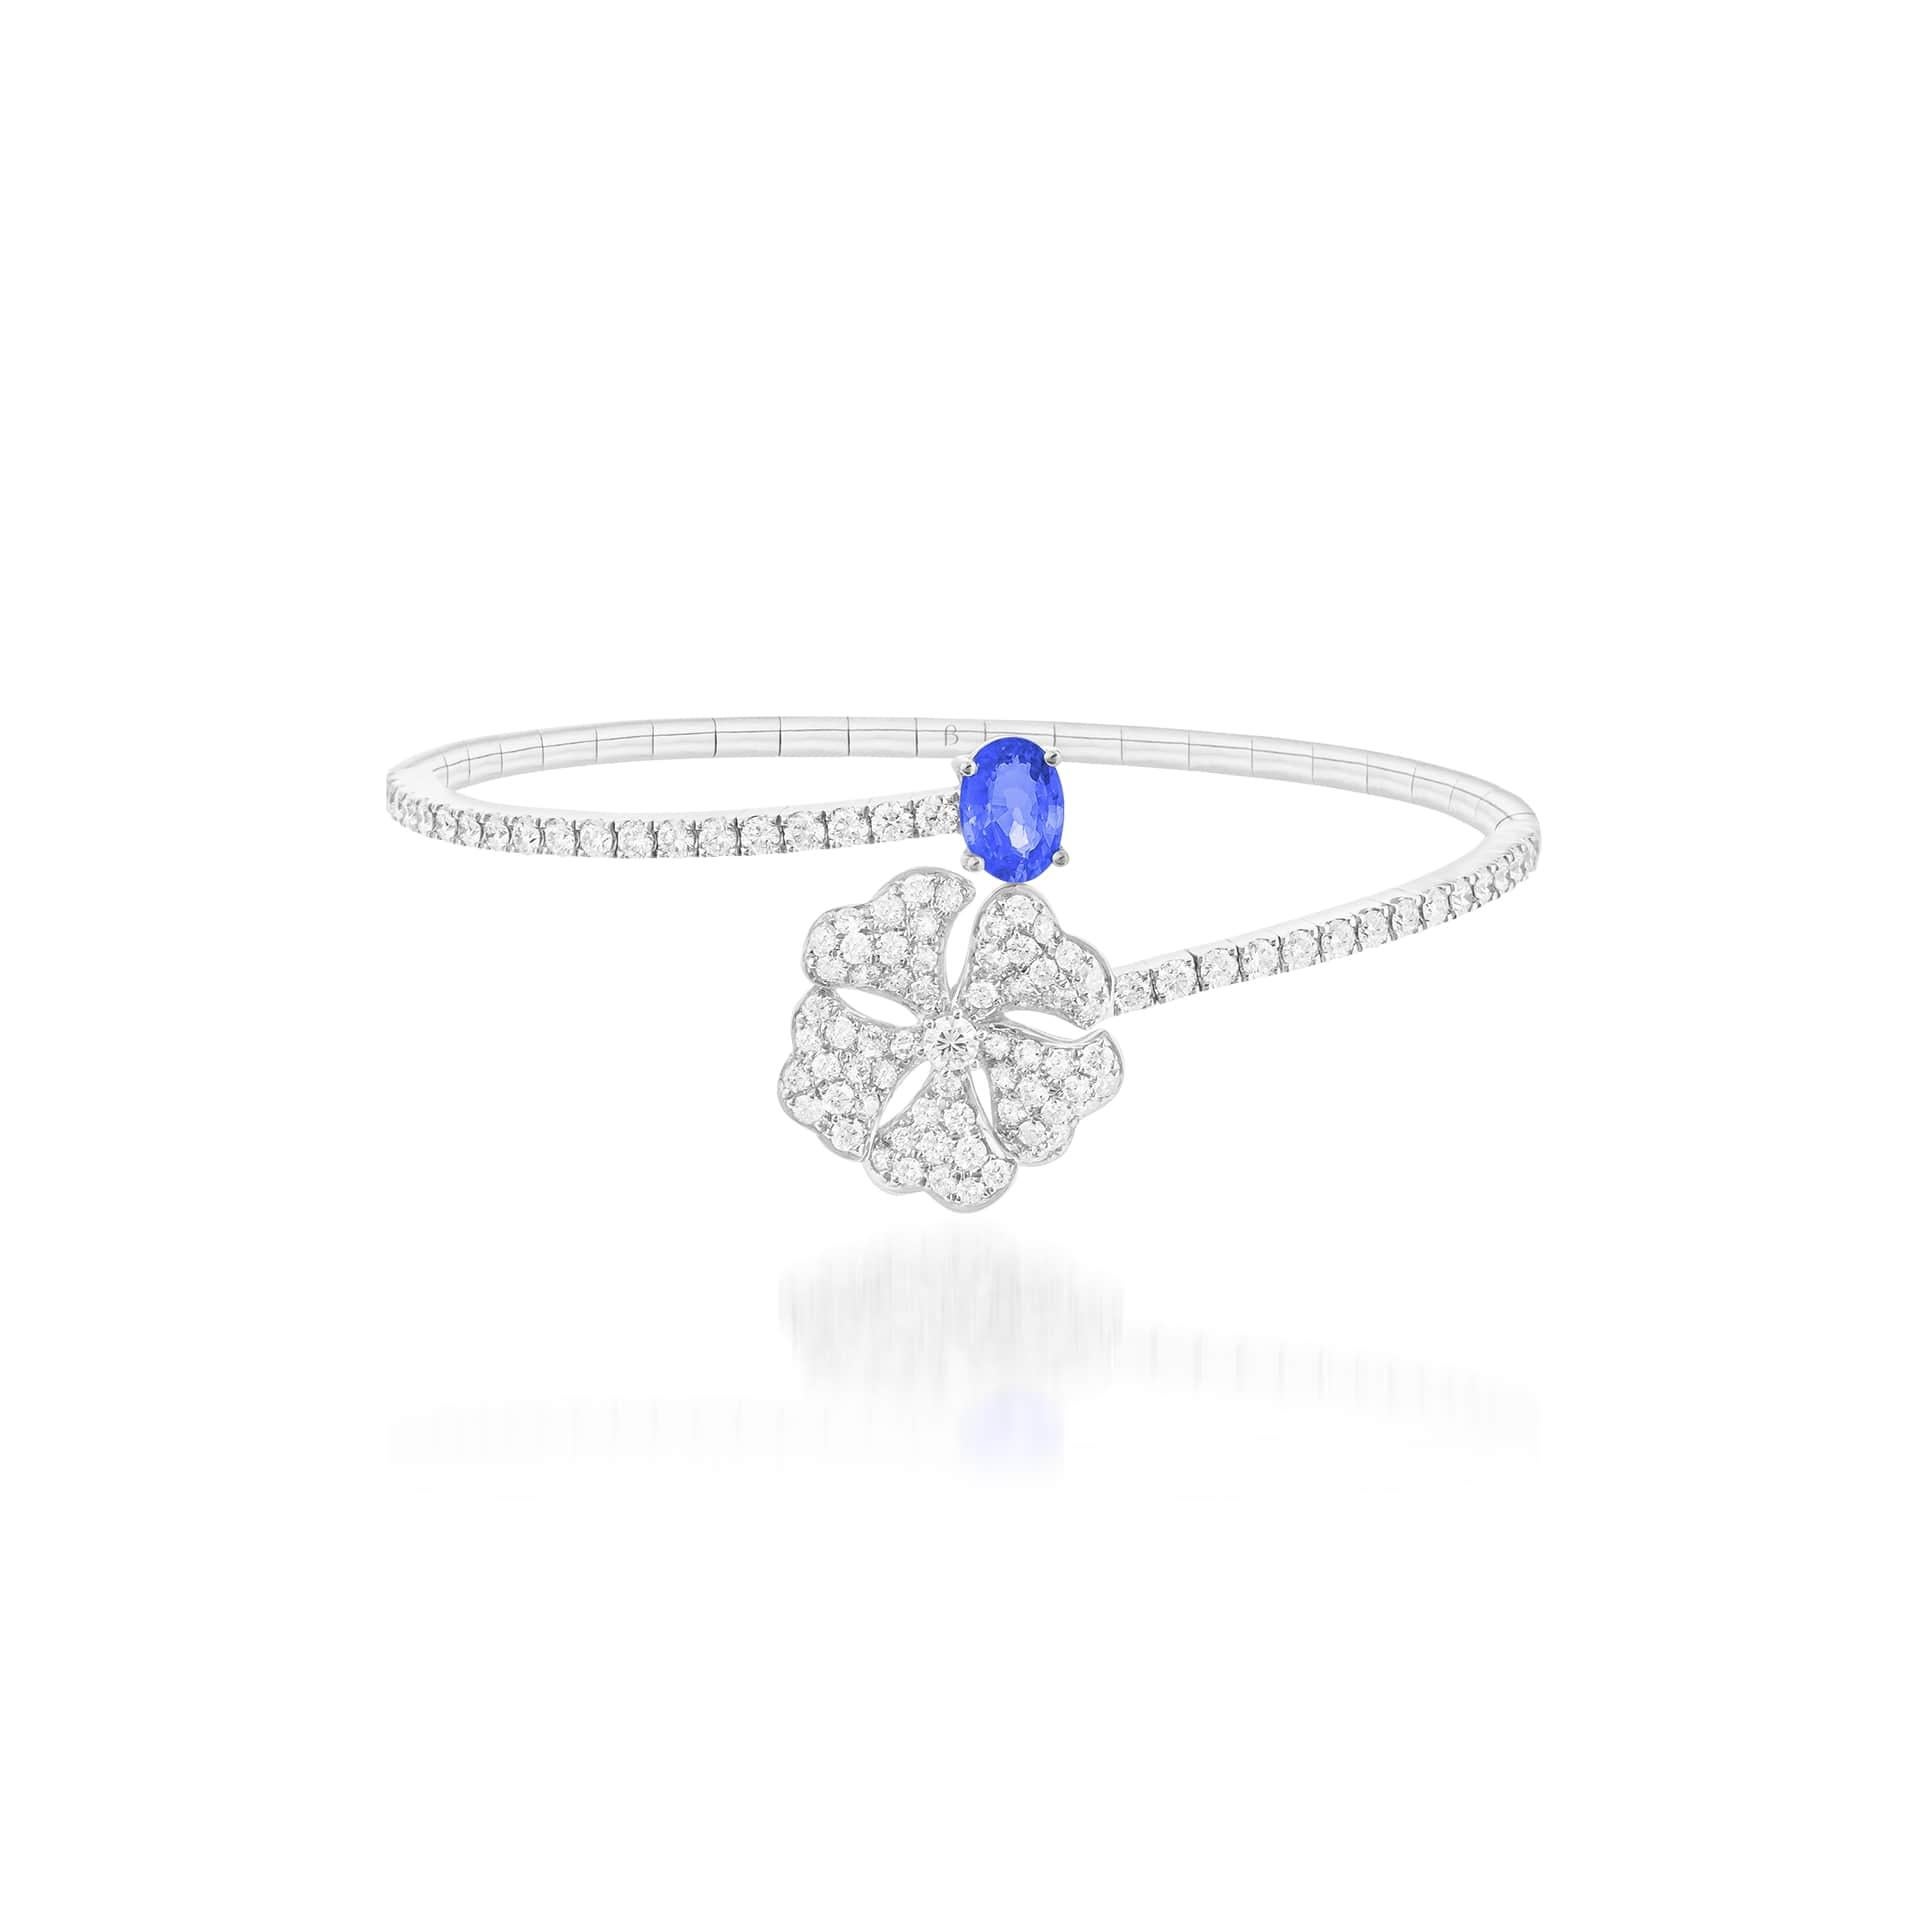 Bloom Blue Sapphire and Diamond Open Spiral Bangle in 18K White Gold

Inspired by the exquisite petals of the alpine cinquefoil flower, the Bloom collection combines the richness of diamonds and precious metals with the light versatility of this